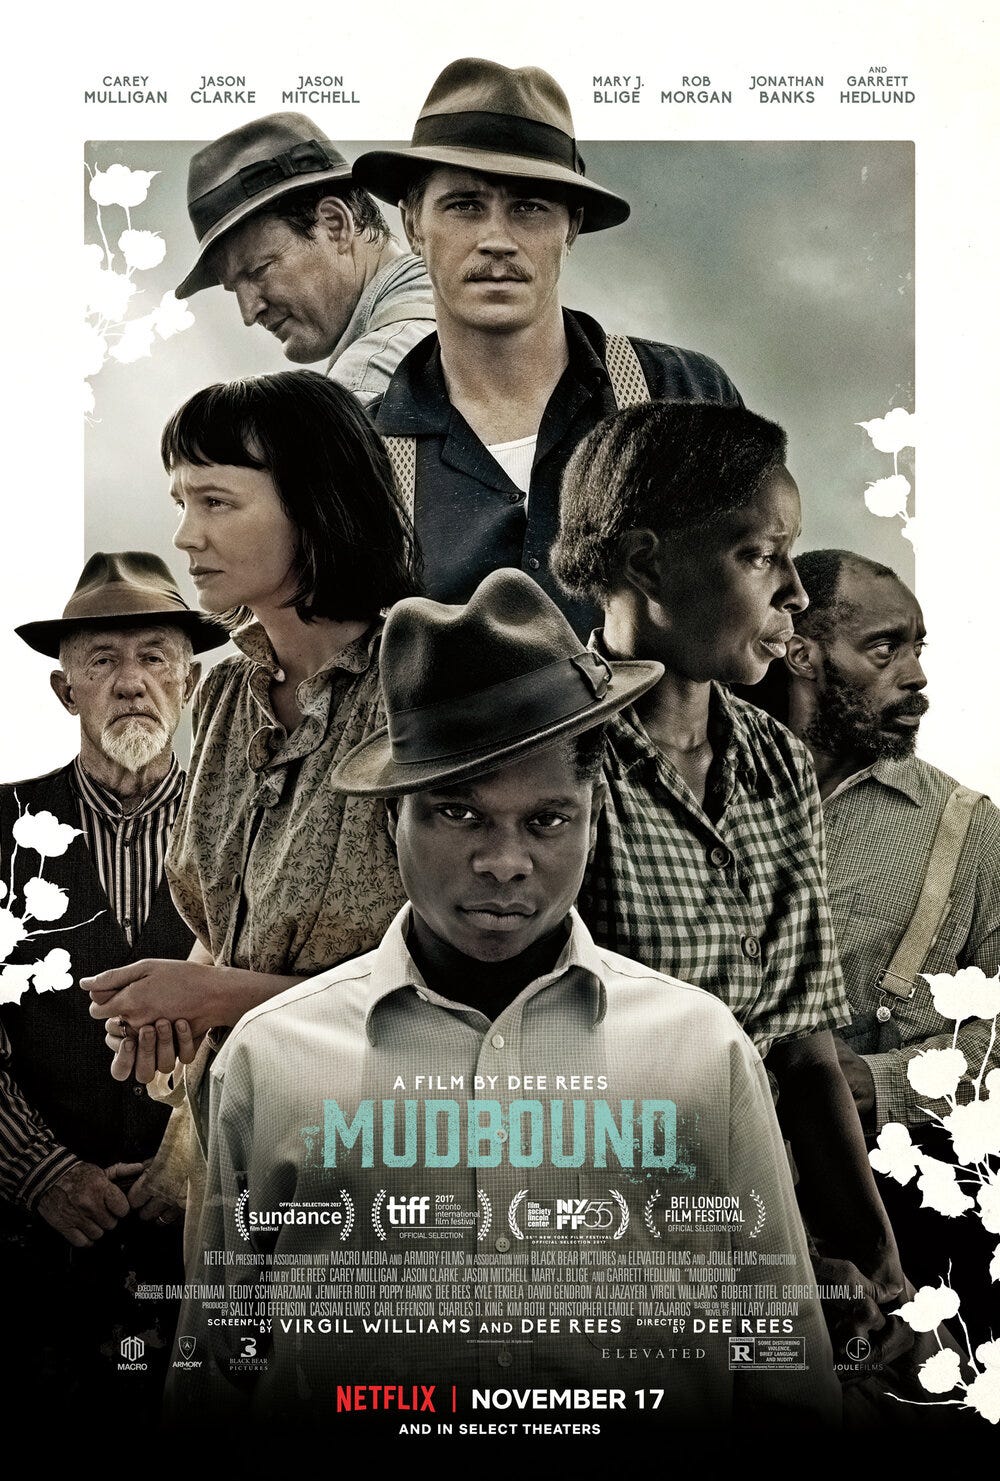 While not  12 Years A Slave heavy ,  Mudbound  is probably the heaviest on this list. The performances are spectacular, the soundtrack is haunting and Mary J Blige gives an incredibly nuanced (Academy Award Nominated) performance.  Available now on Netflix.